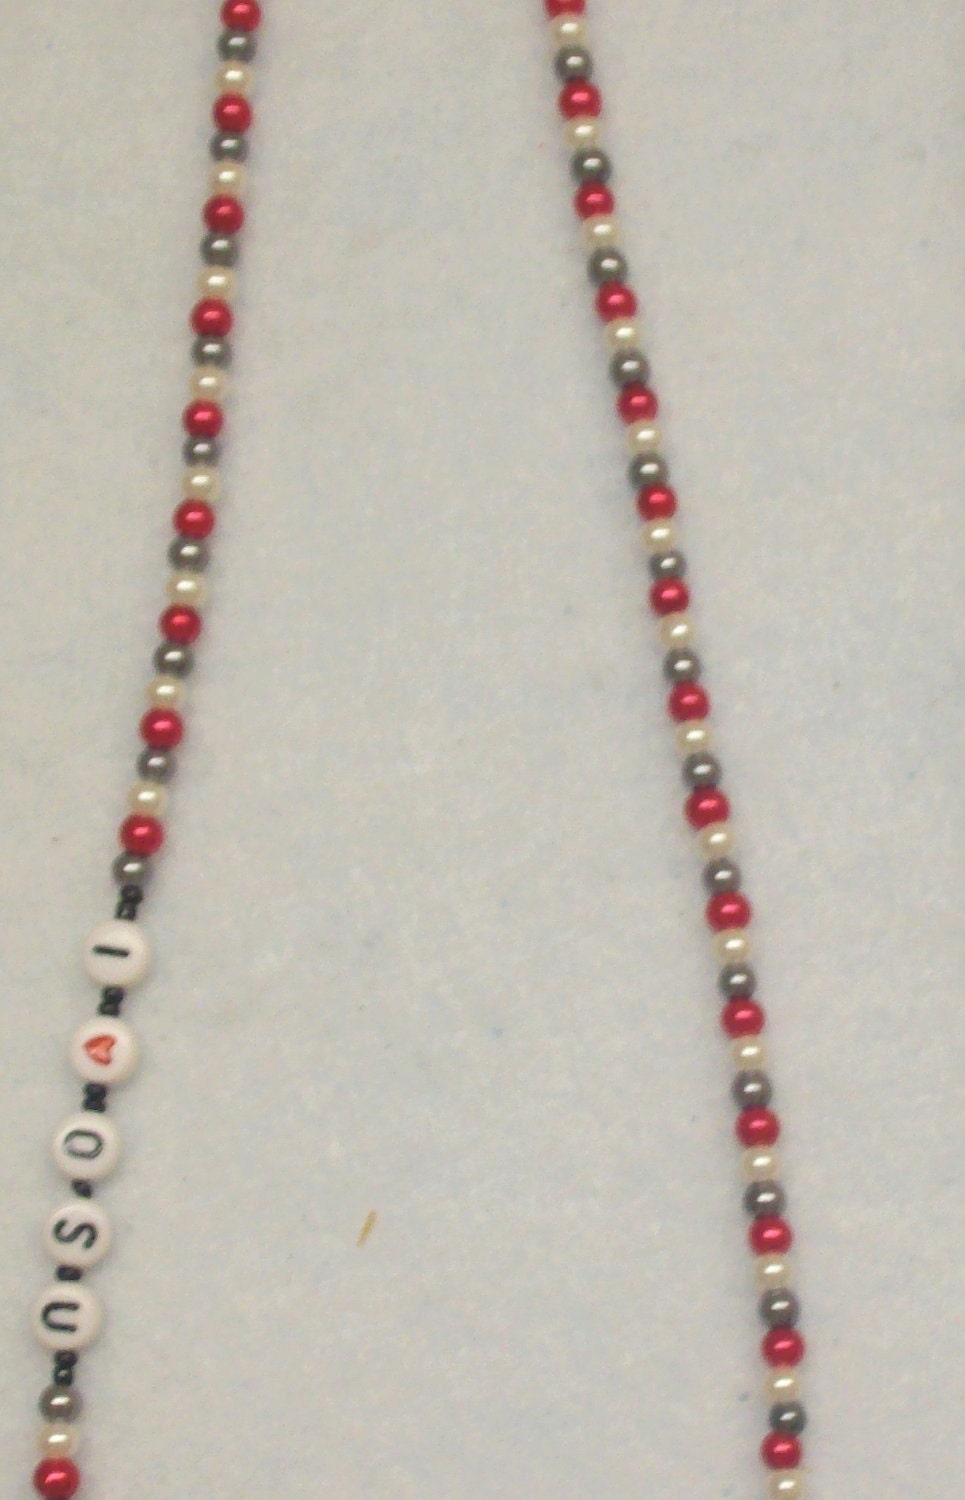 Ohio State necklace with OSU letters . .. Long ... faux pearls